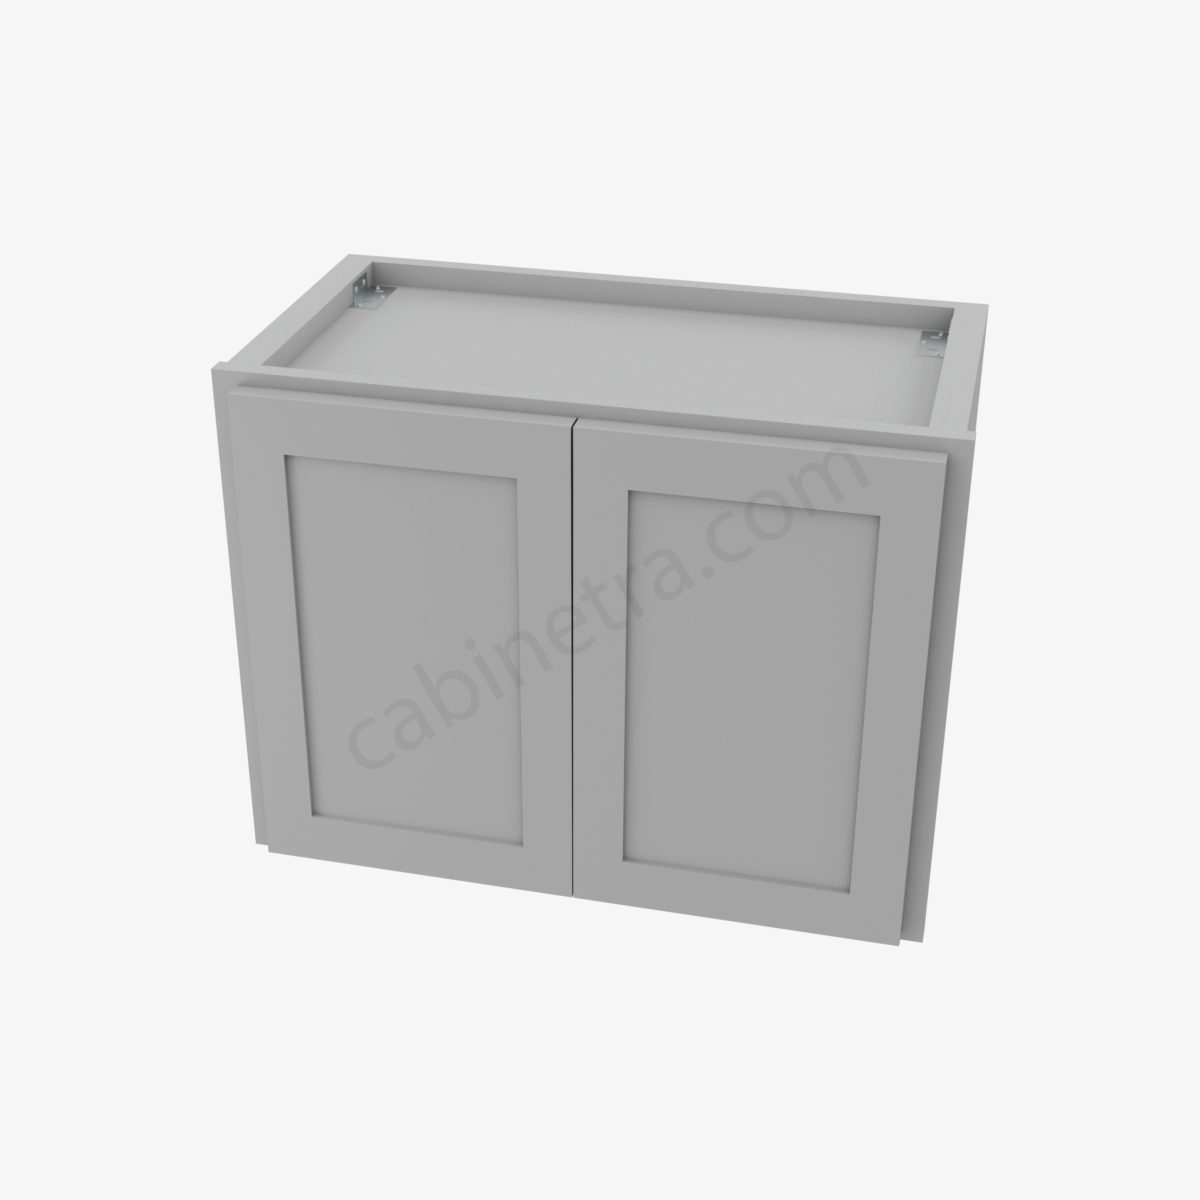 AB W2418B 3 Forevermark Lait Gray Shaker Cabinetra scaled